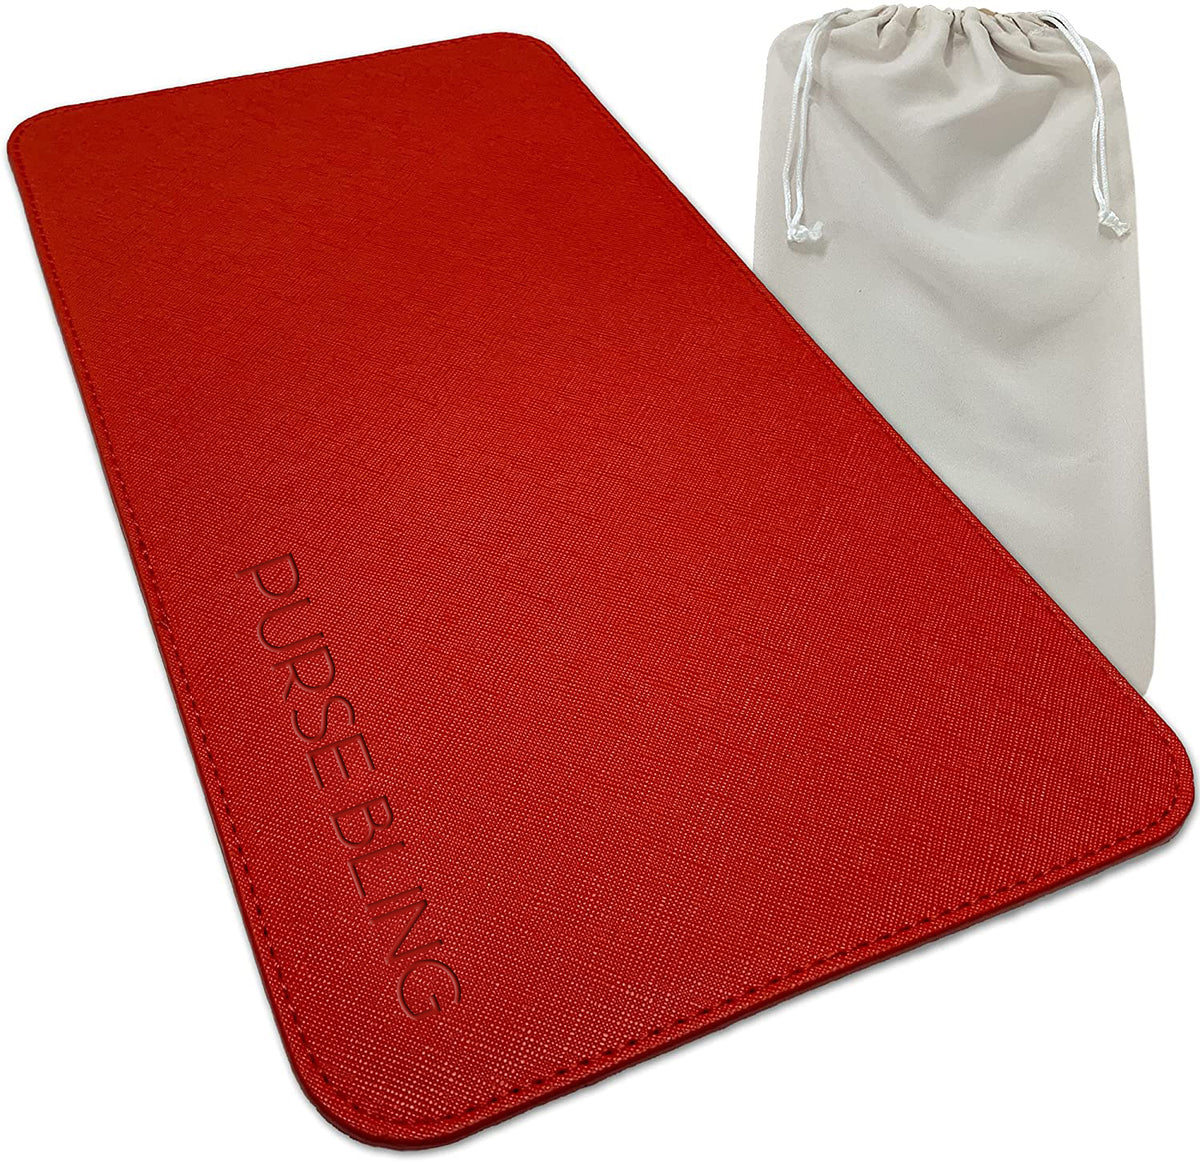 A red leather Base Shaper for LV Speedy Bags with a white Purse Bling pouch for purse sag.